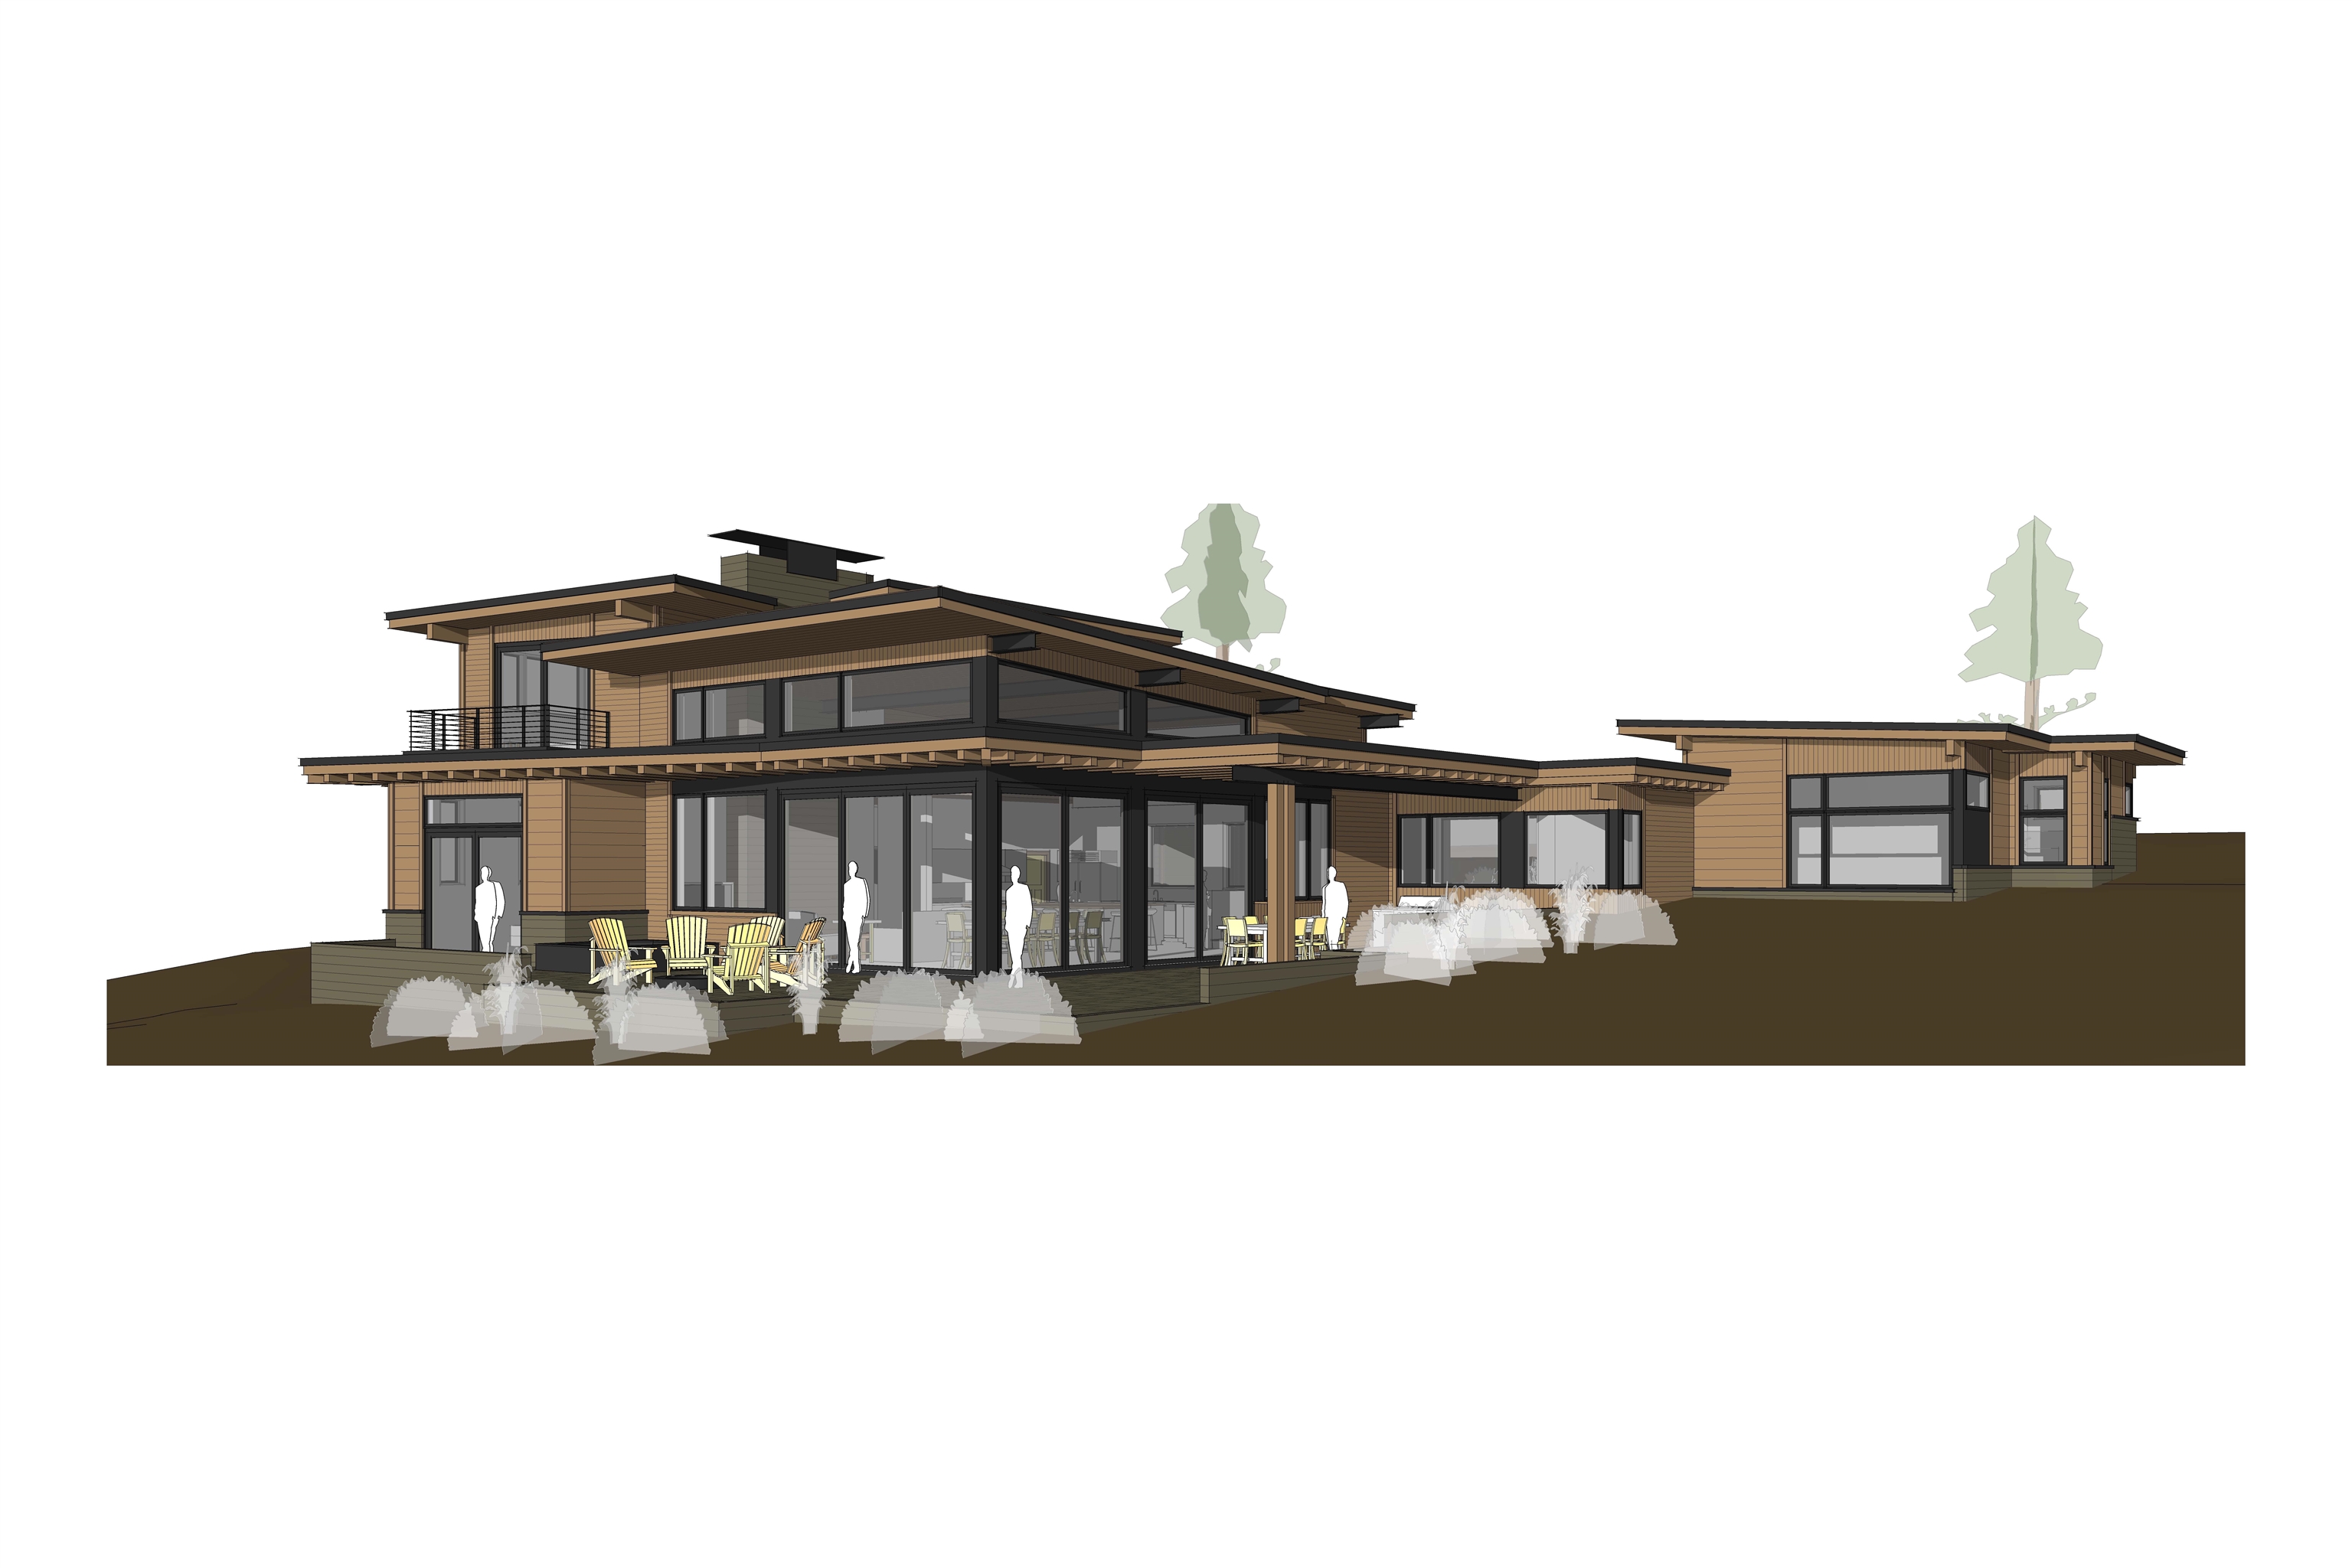 Image for 13185 Snowshoe Thompson Circle, Truckee, CA 96161